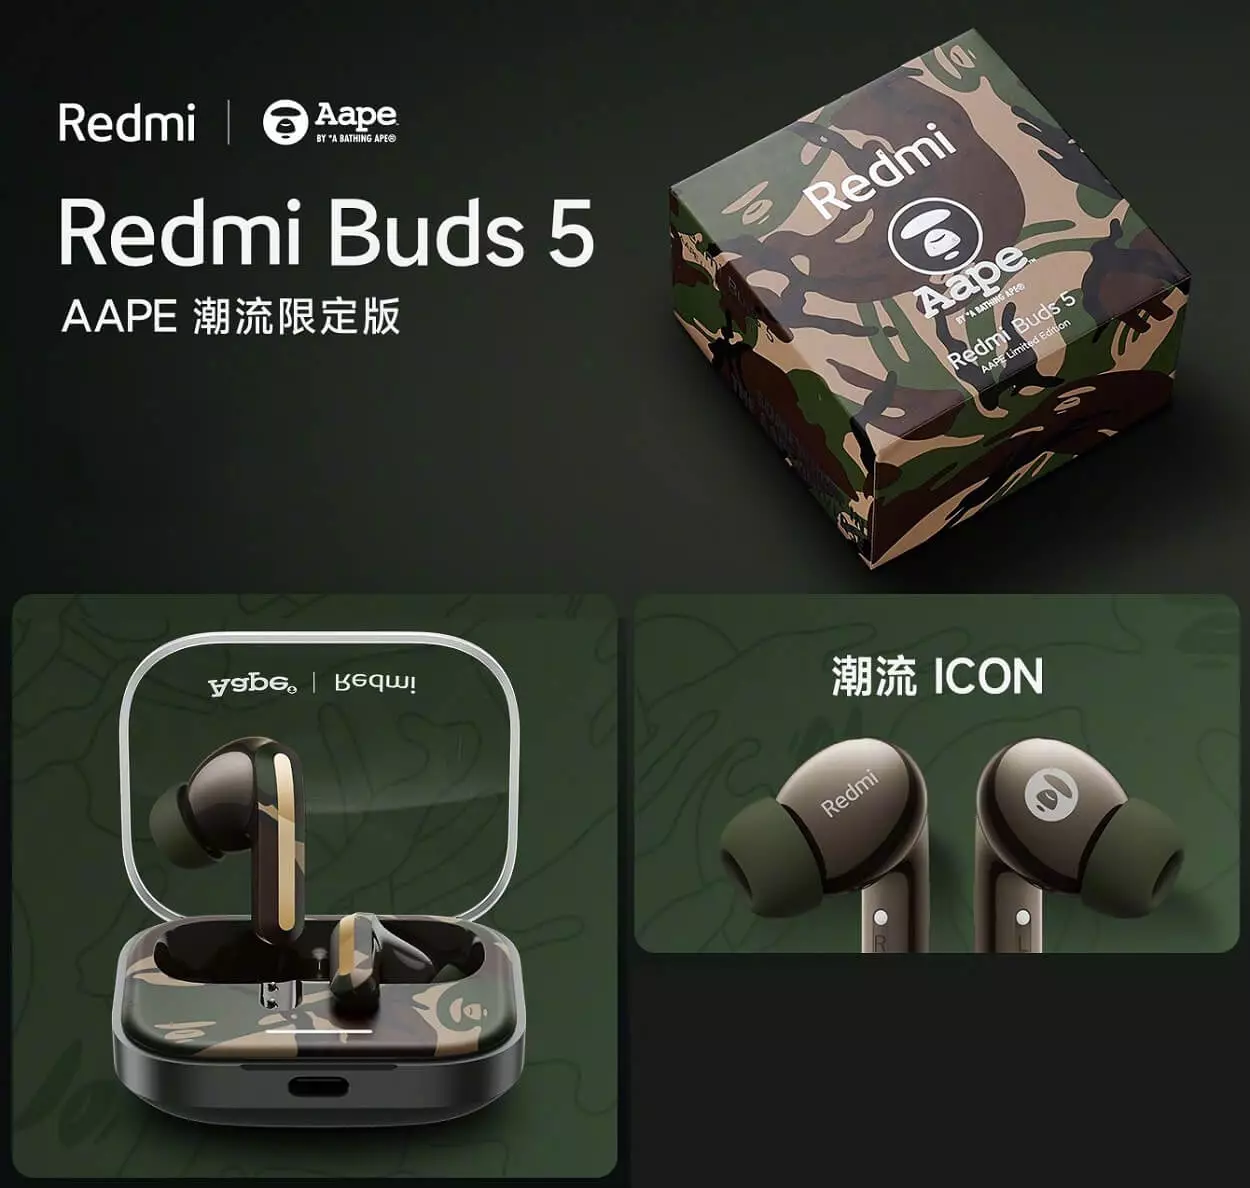 Redmi Buds 5 AAPE trend limited edition cn.